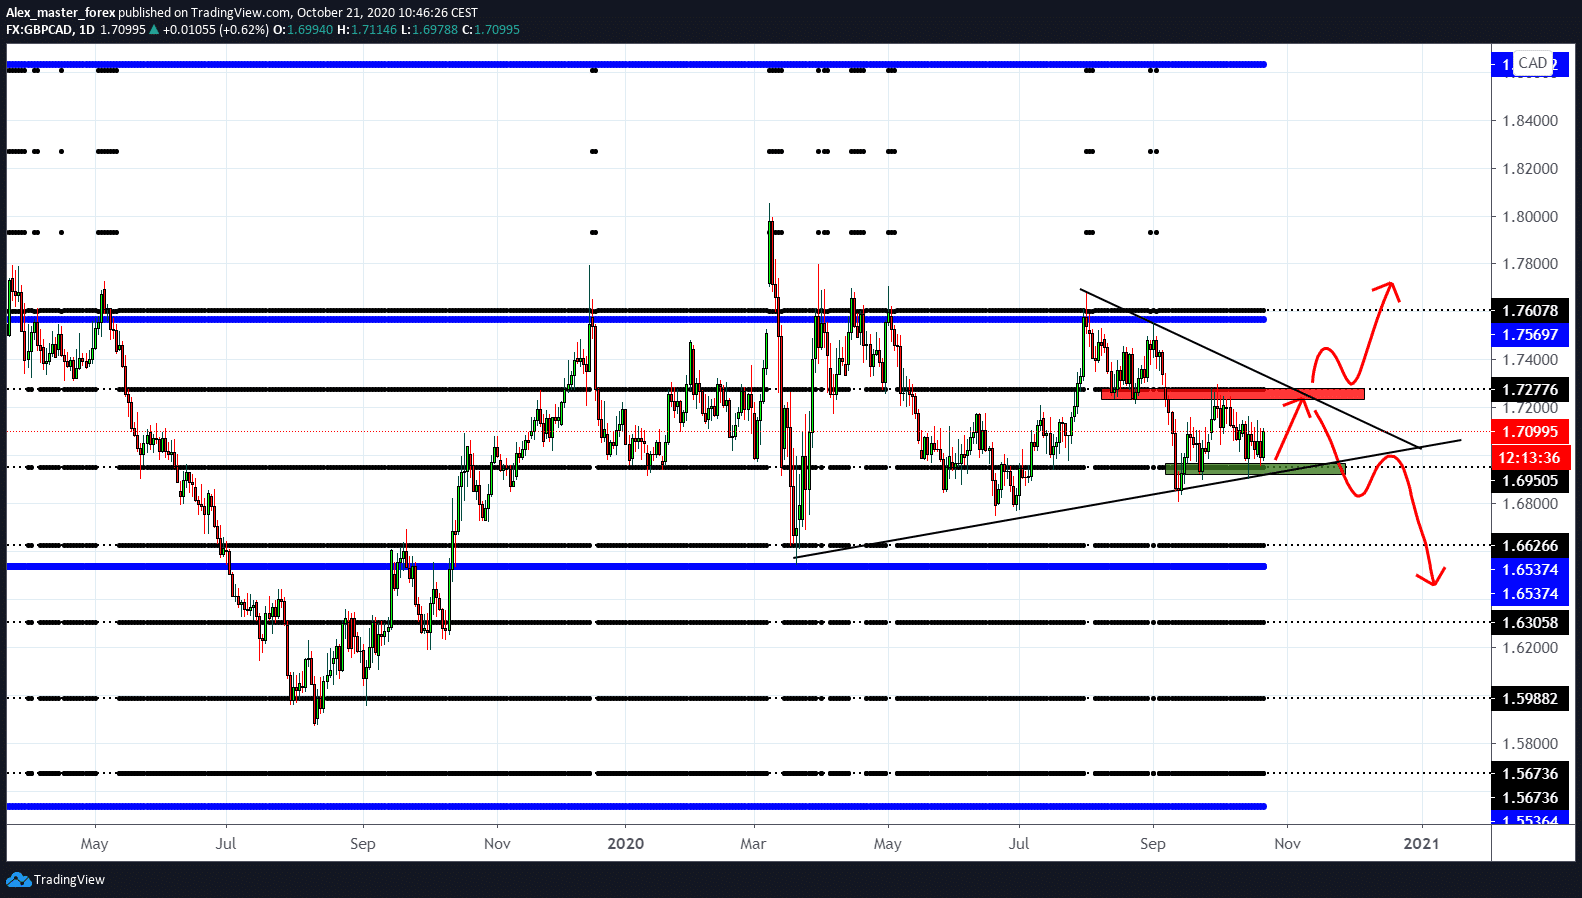 GBP / CAD on support